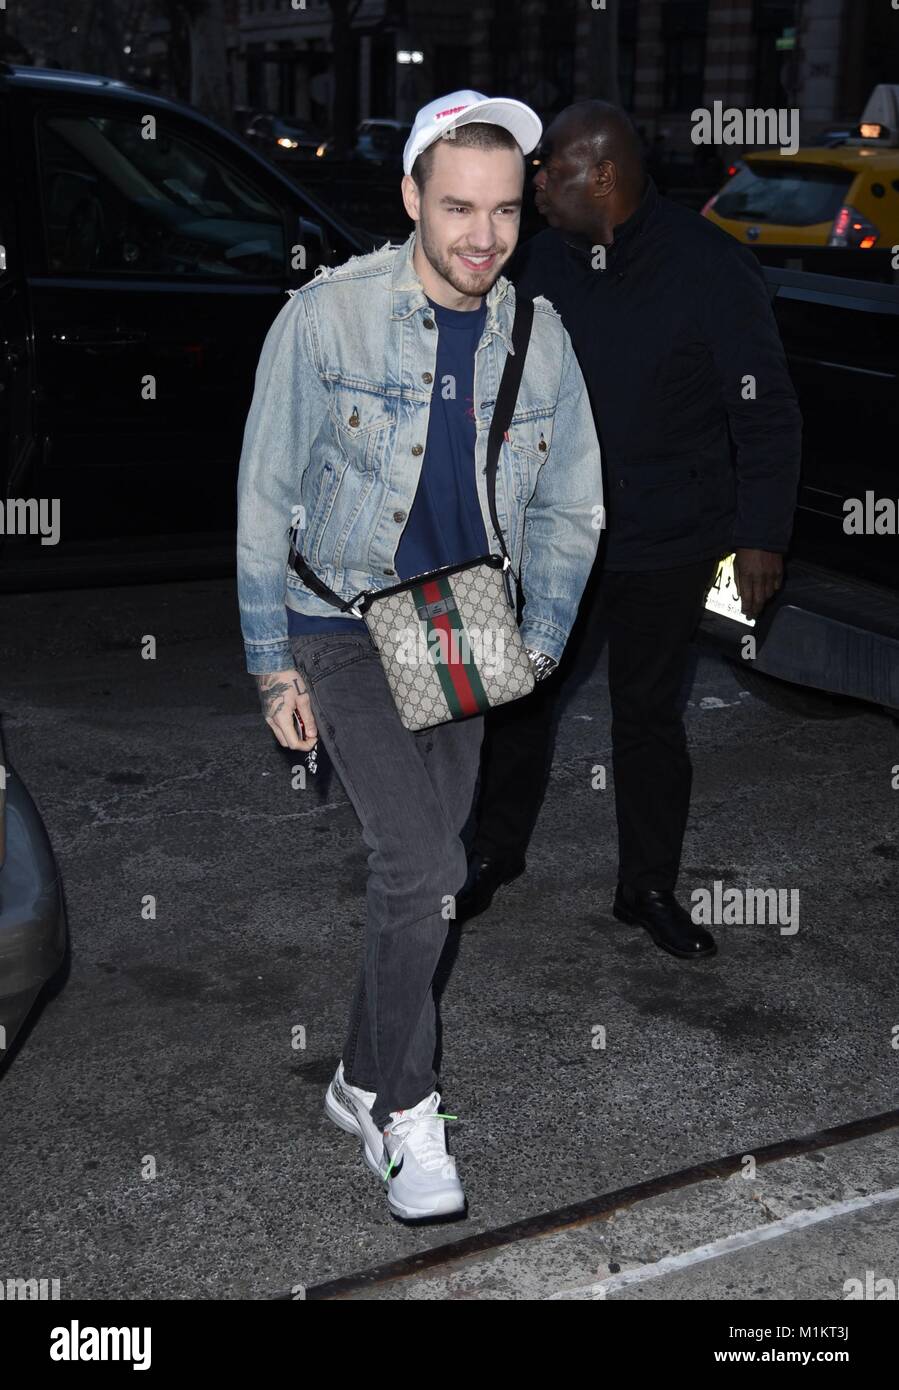 New York, NY, USA. 31st Jan, 2018. Liam Payne, seen at Z-100 studios for  Elvis Duran and the Morning Show. He is wearing Off-White X Nike Air Max 97  sneakers. out and